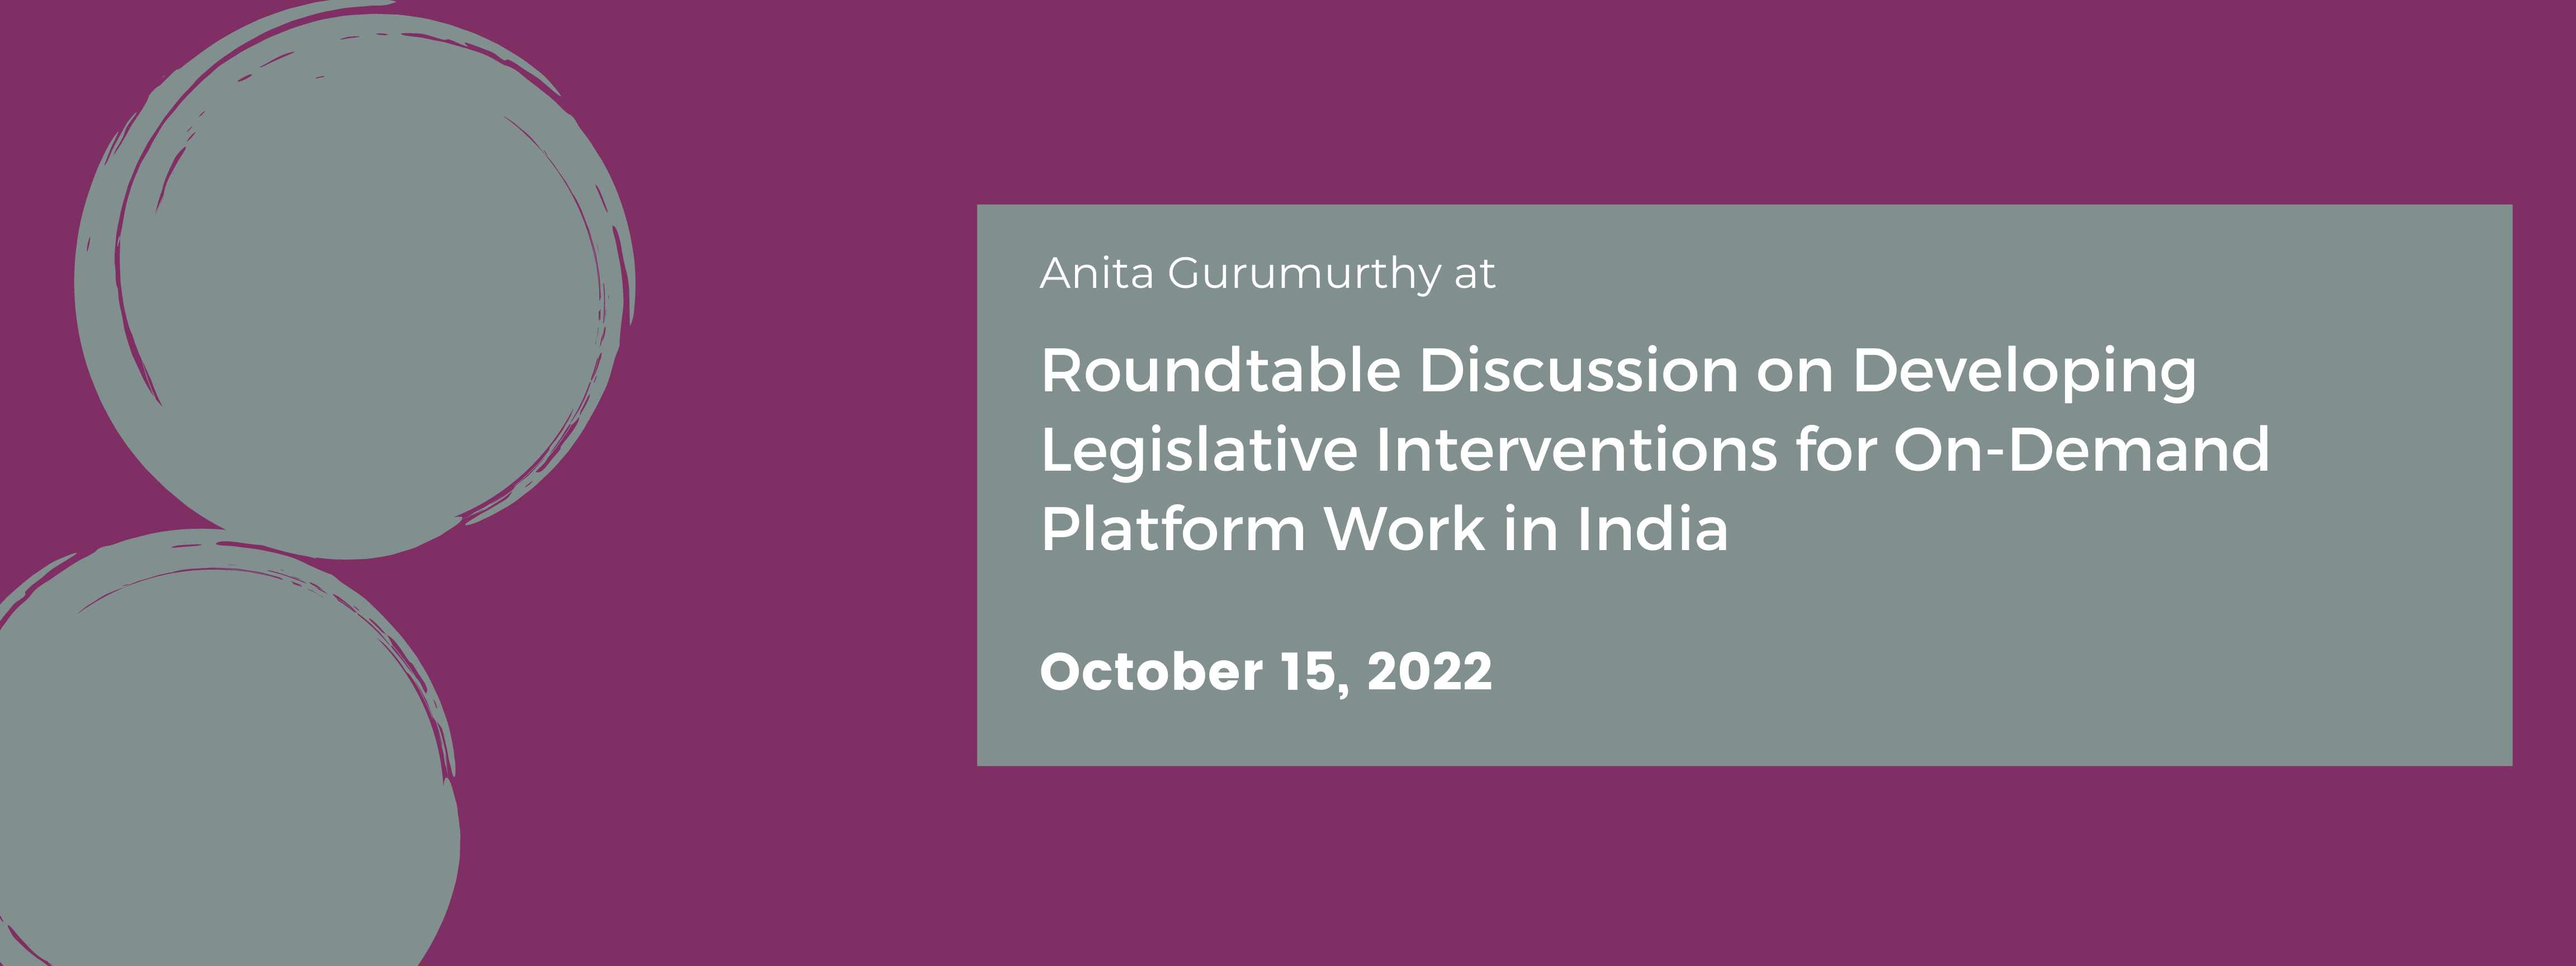 Roundtable Discussion on Developing Legislative Interventions for On-Demand Platform Work in India